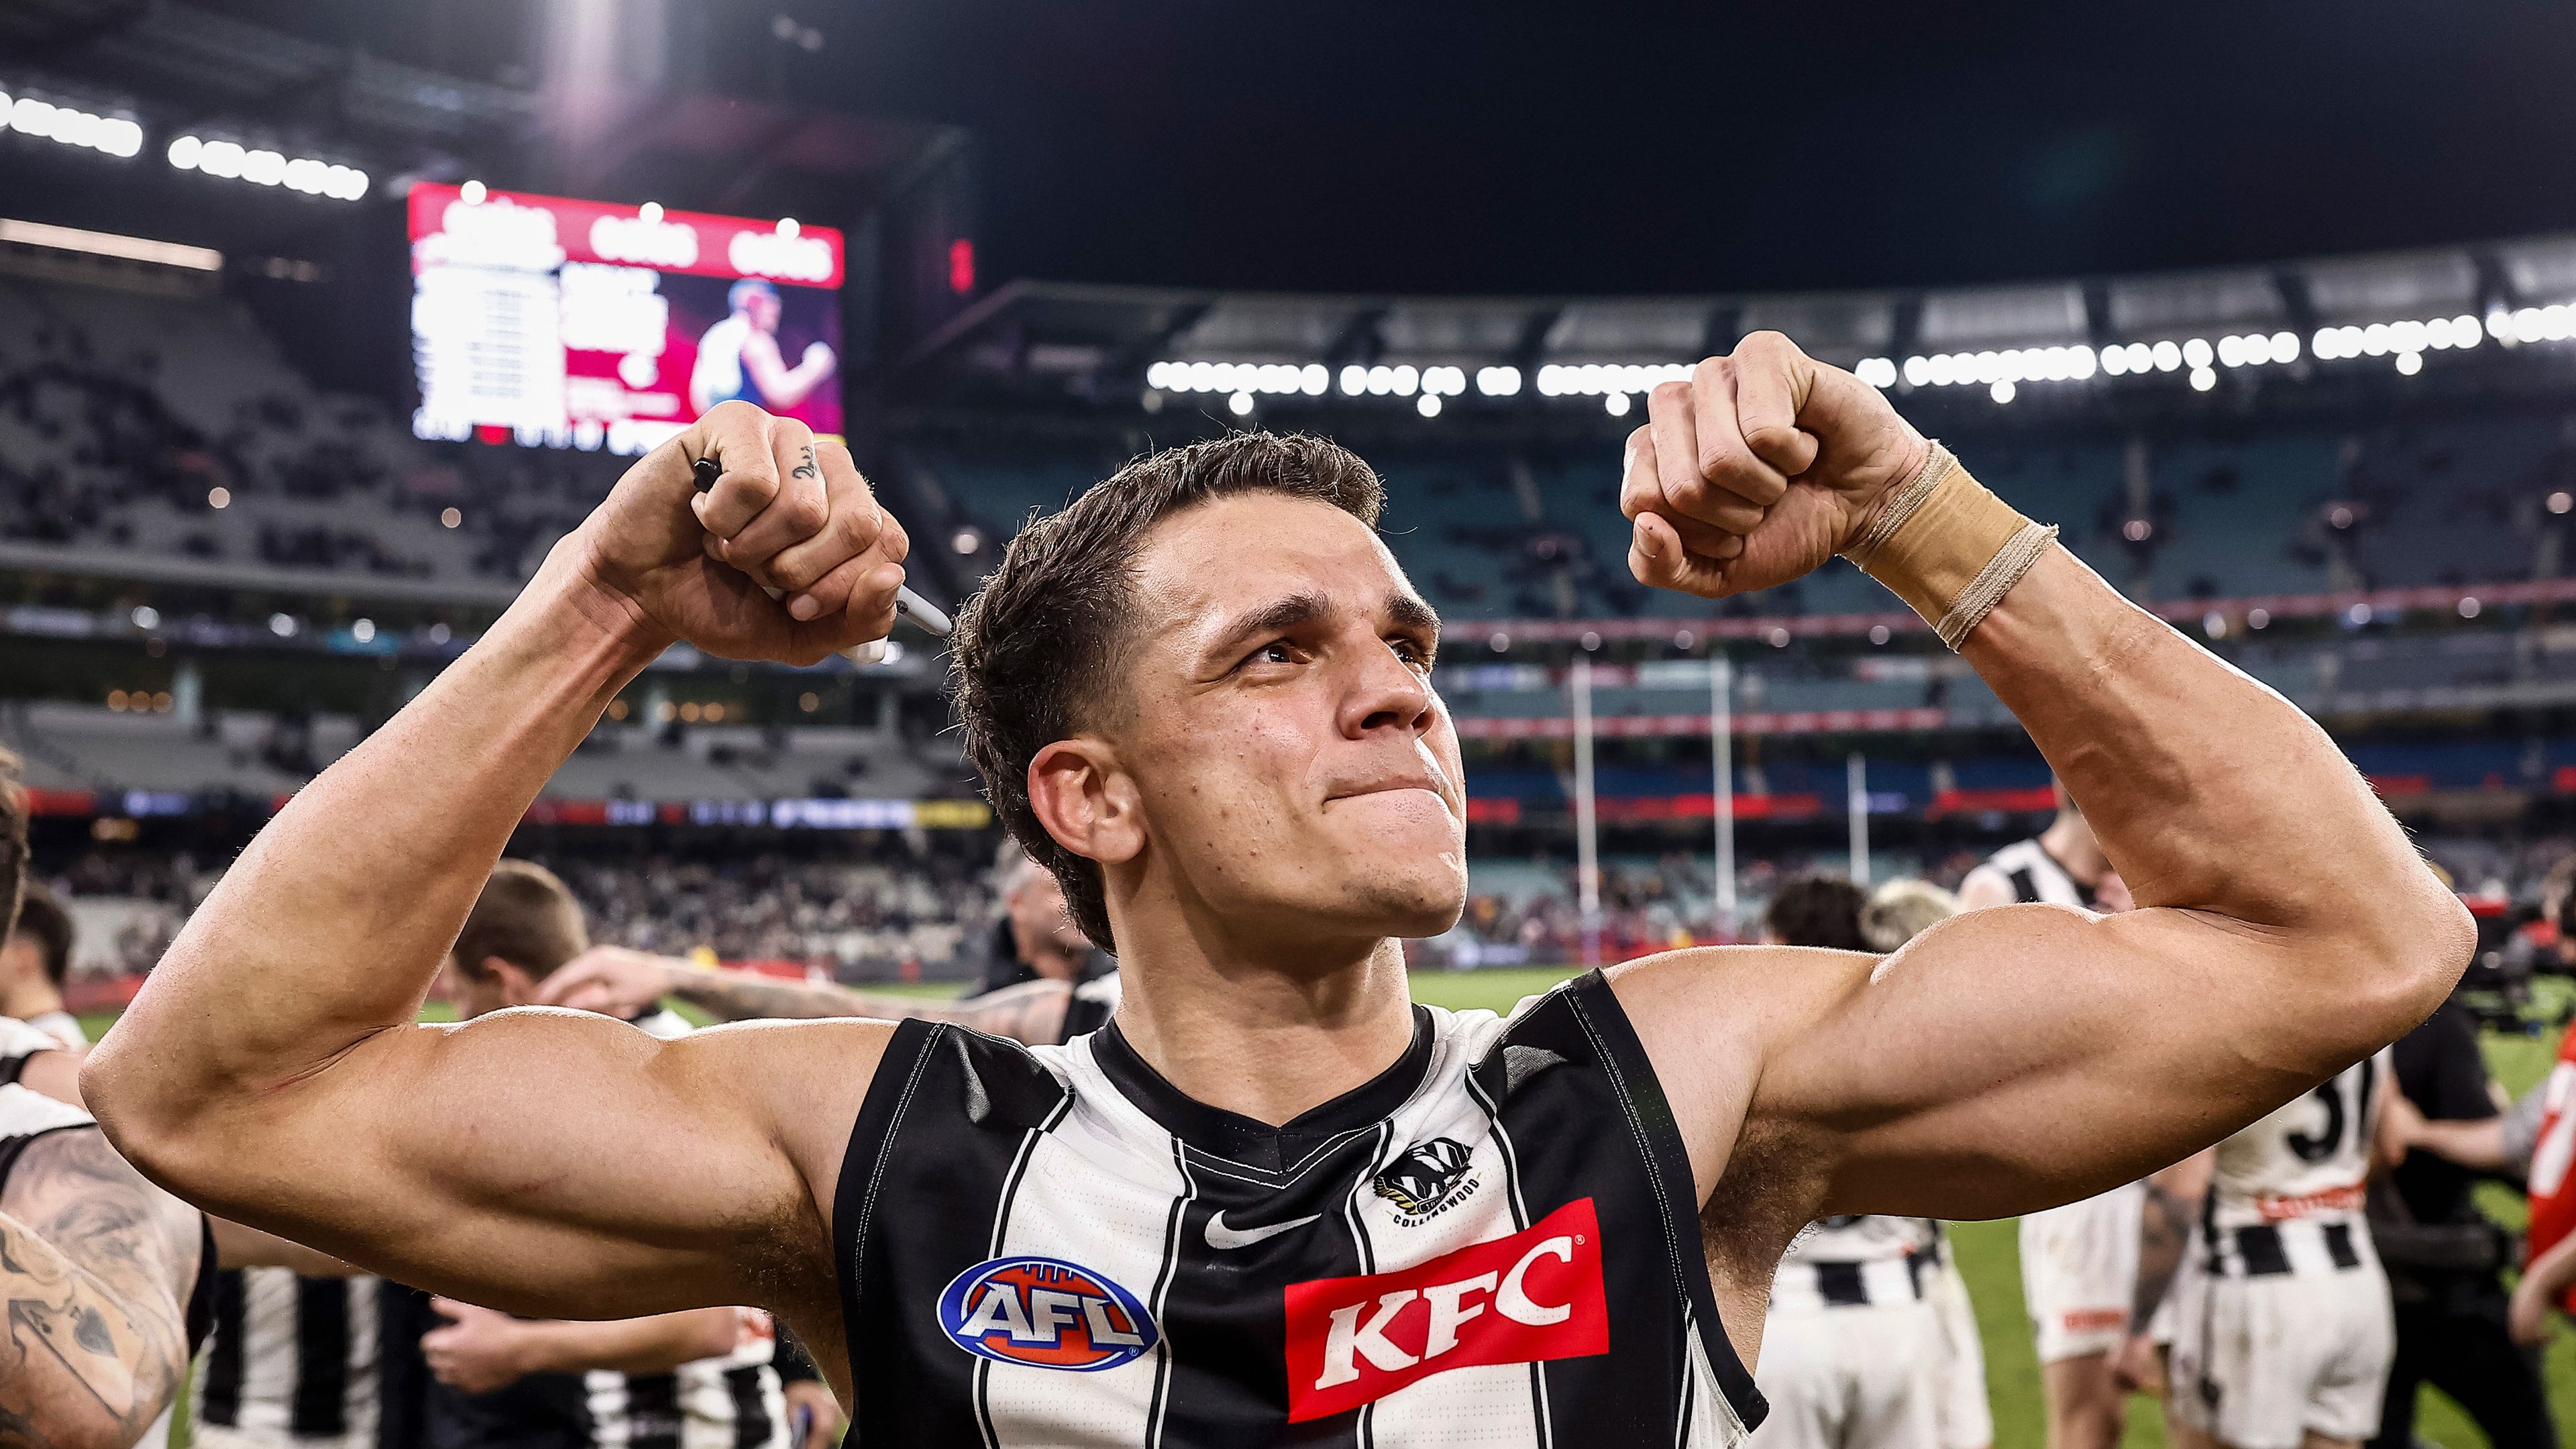 Collingwood must 'keep a lid on' celebrations coming into finals, says Kane Cornes